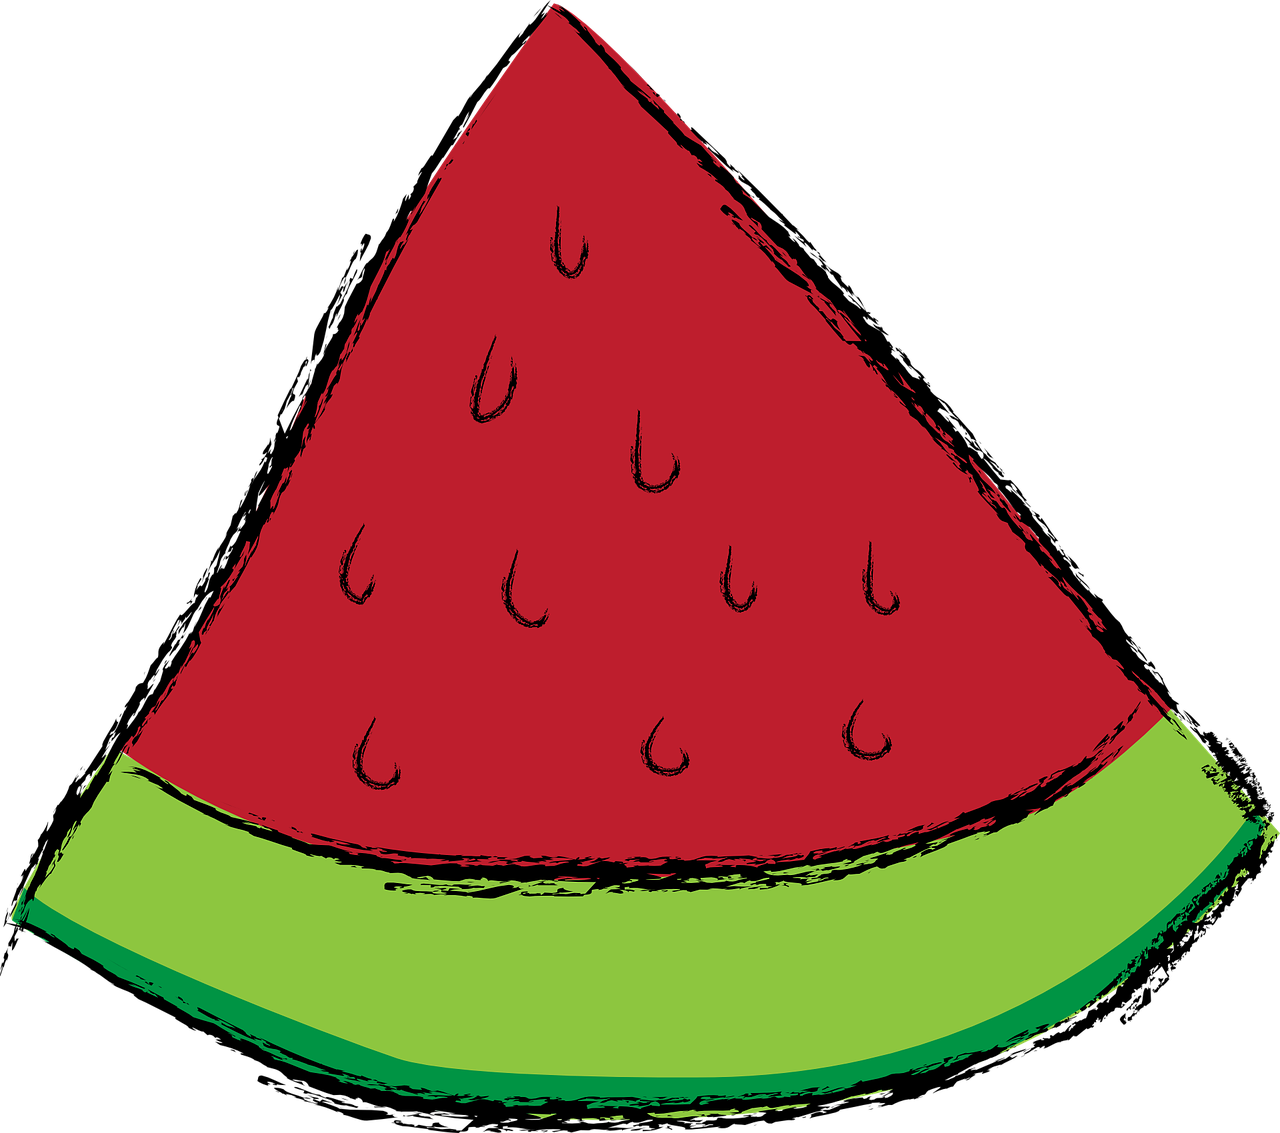 foods clipart watermelon